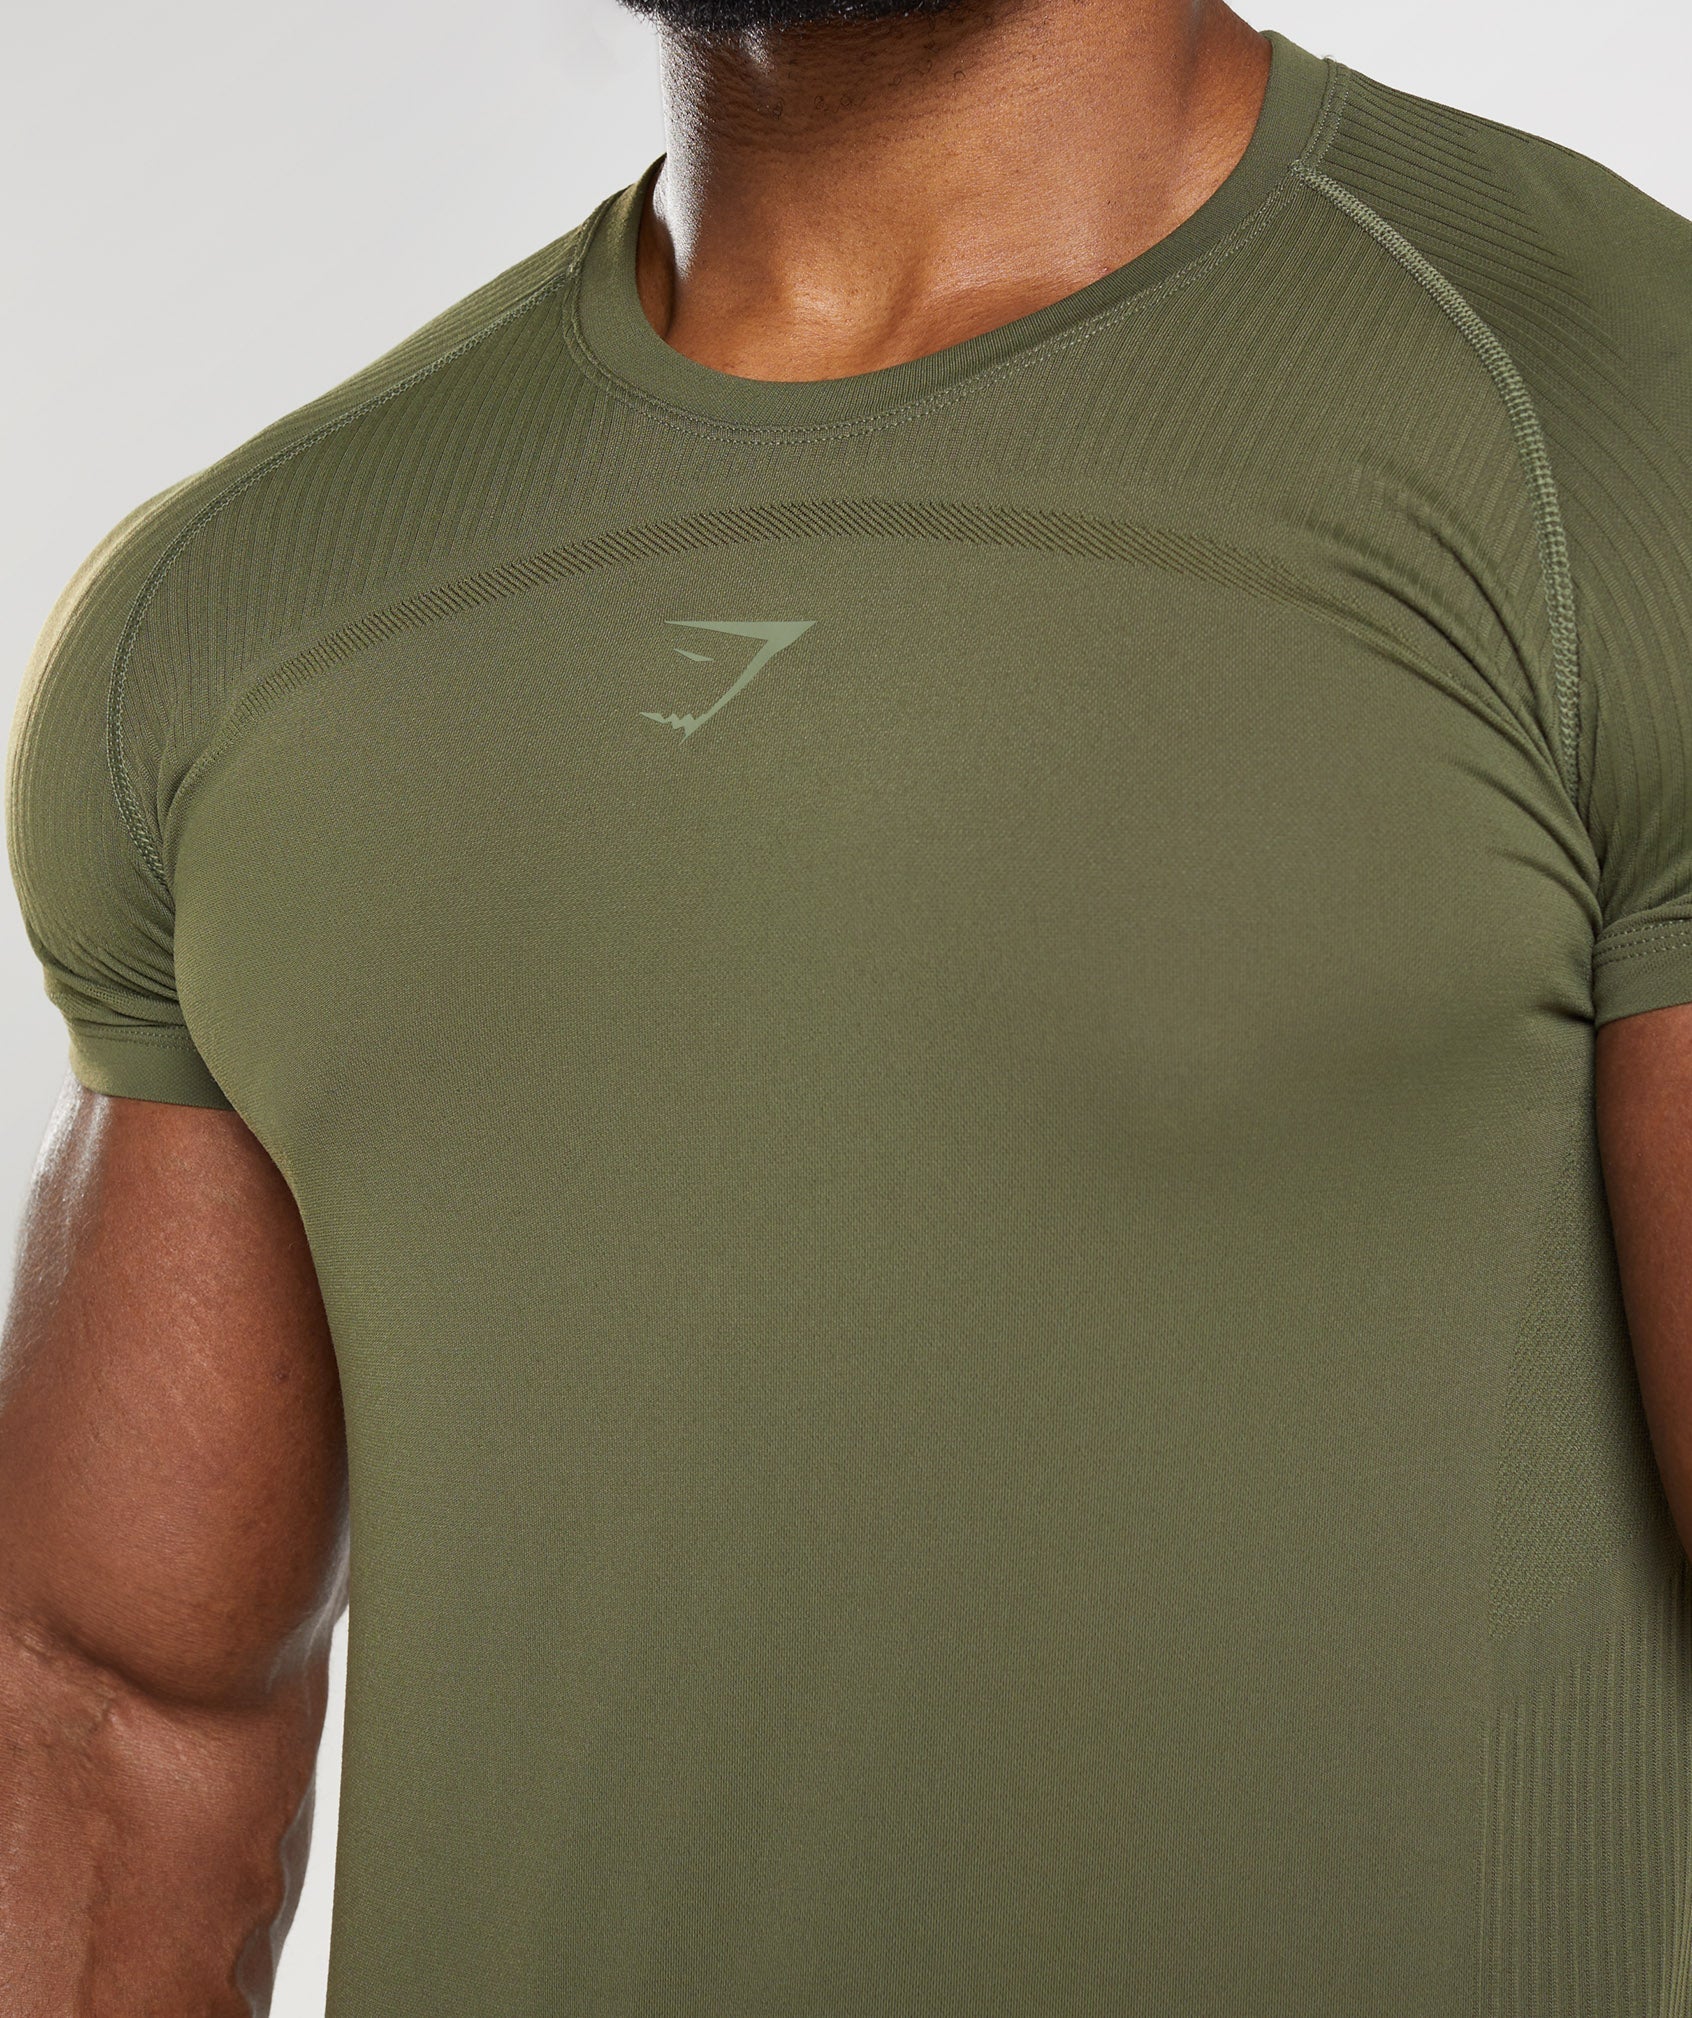 315 Seamless T-Shirt in Core Olive/Marsh Green - view 5